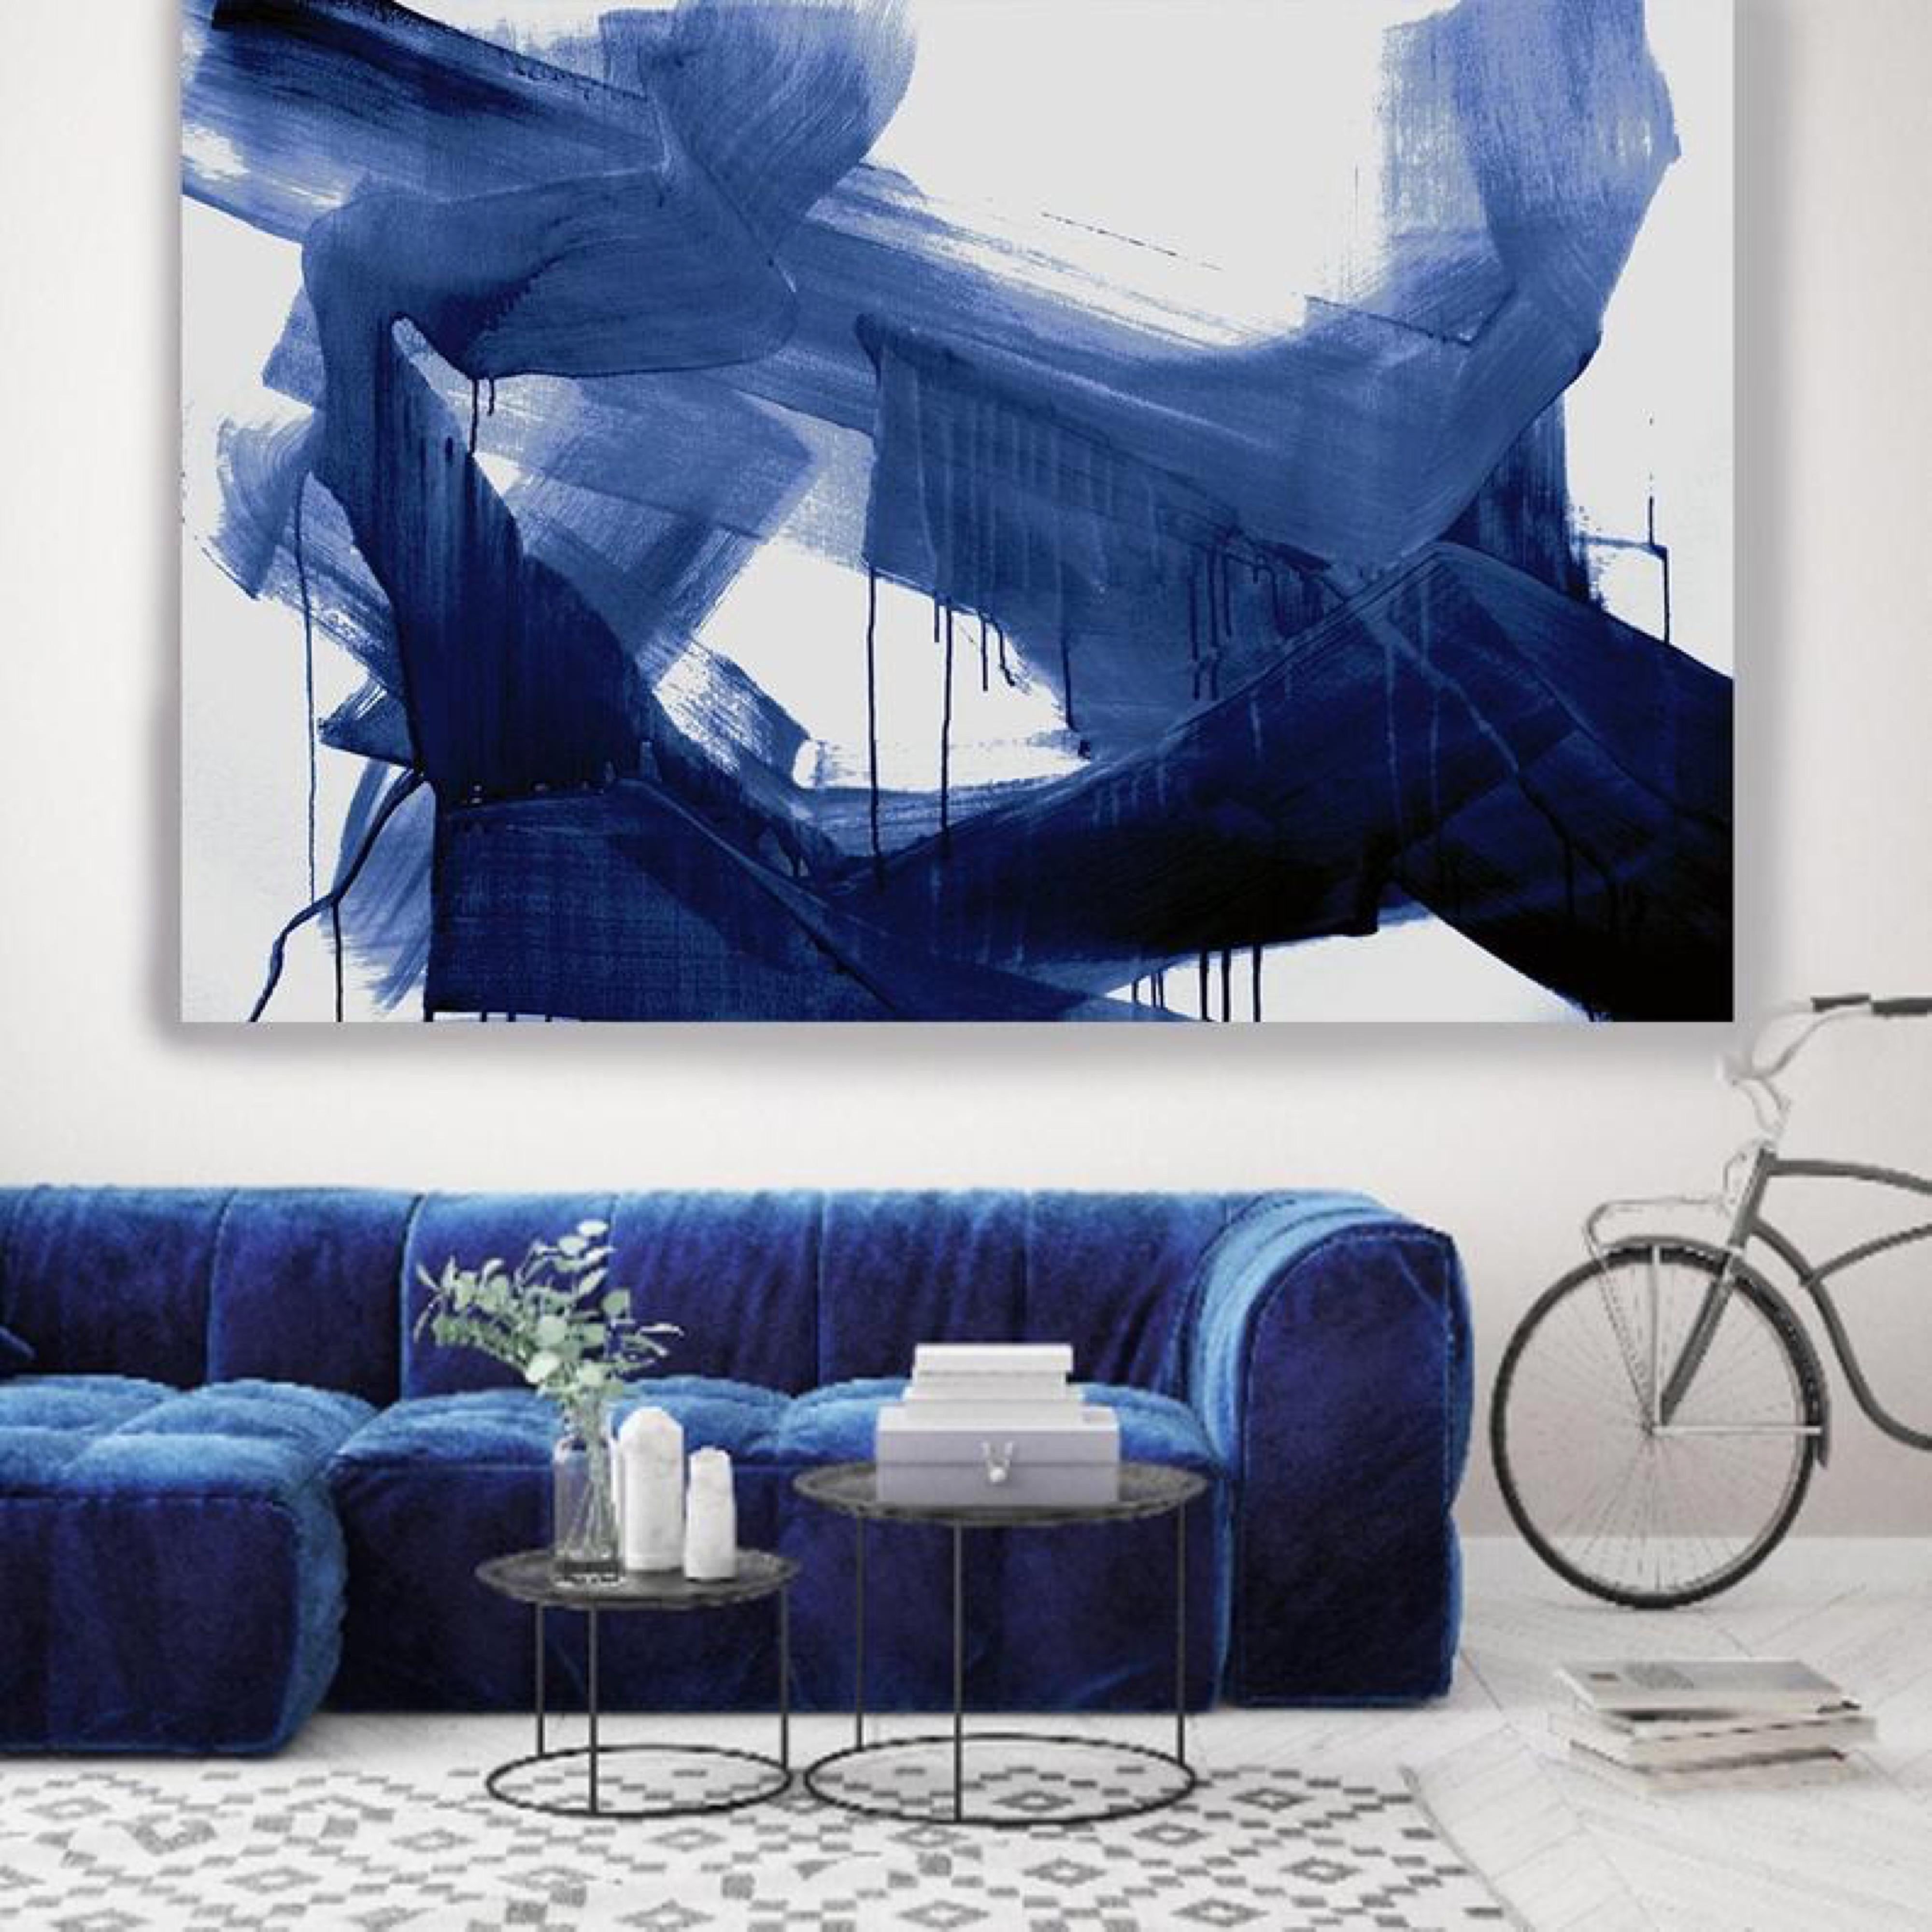 Blue Abstract Painting Art Textured Giclee on Canvas, Free-Spirited 65 x 45 inch 1